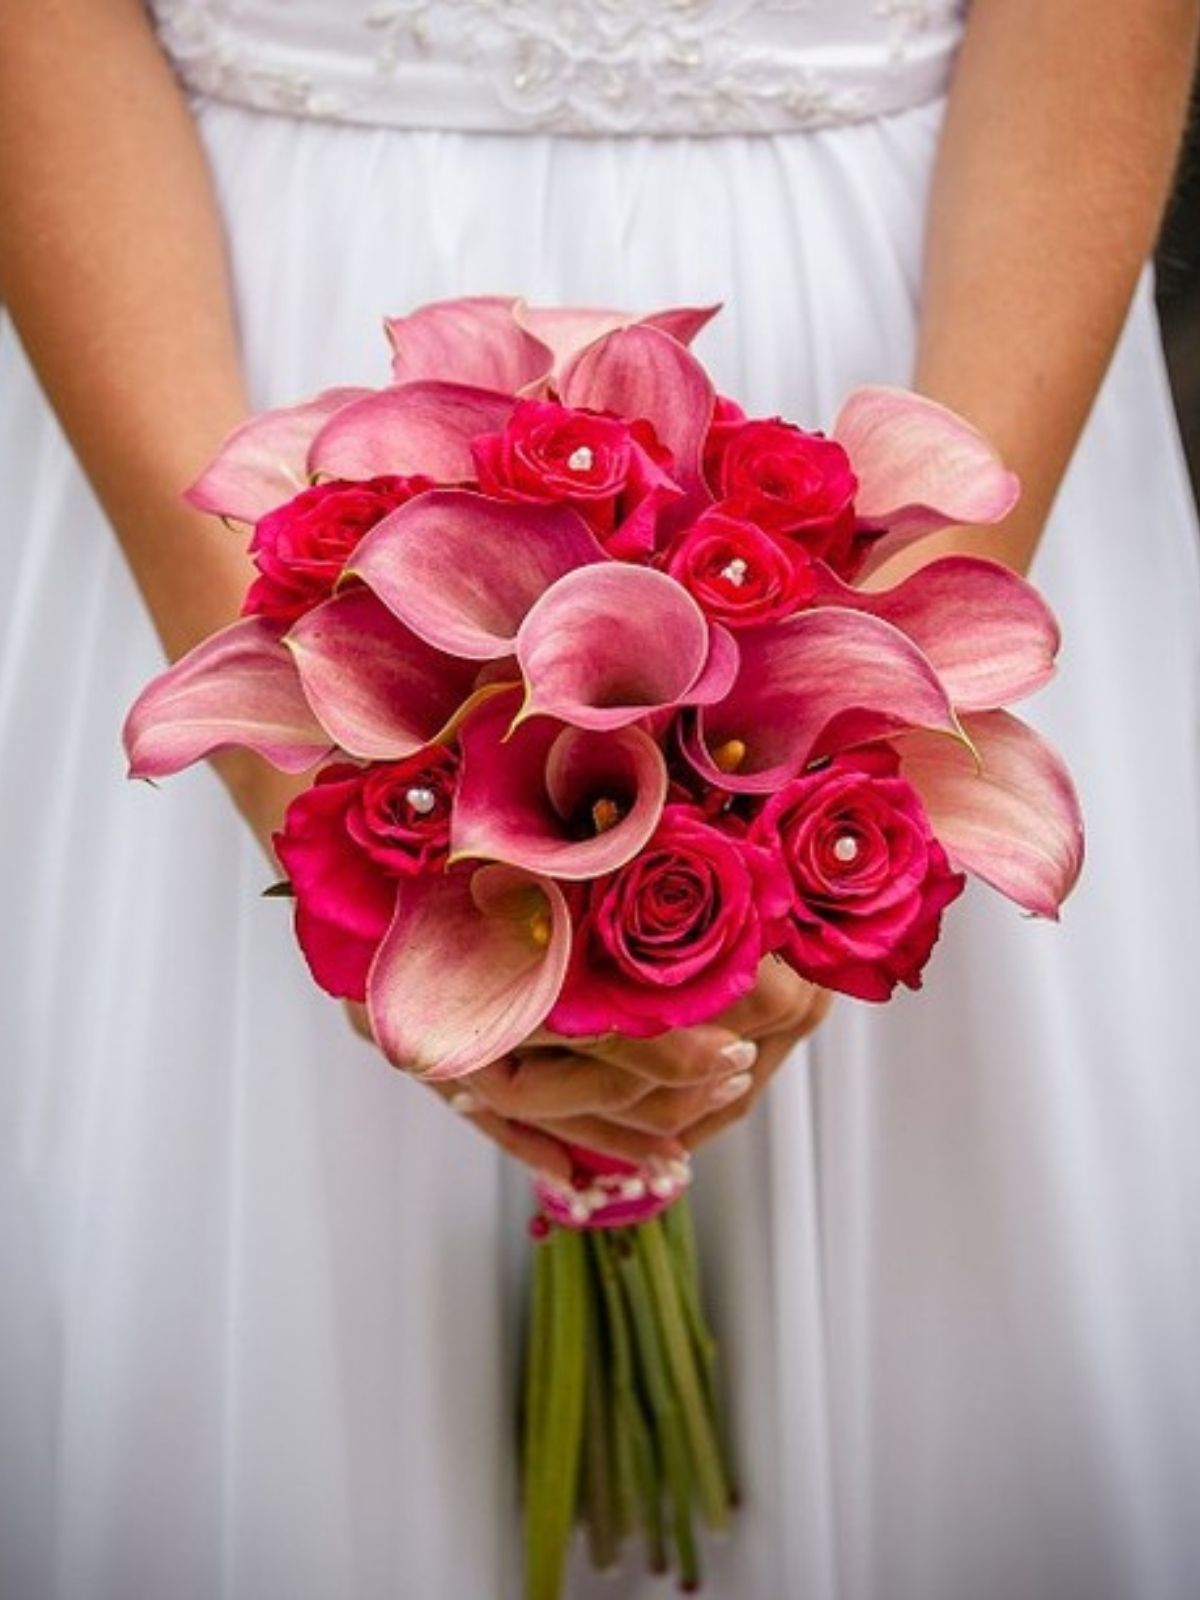 Aneta Floristka Design with Callas - on Thursd Bridal Flowers with Pink Calla and Roses on Thursd